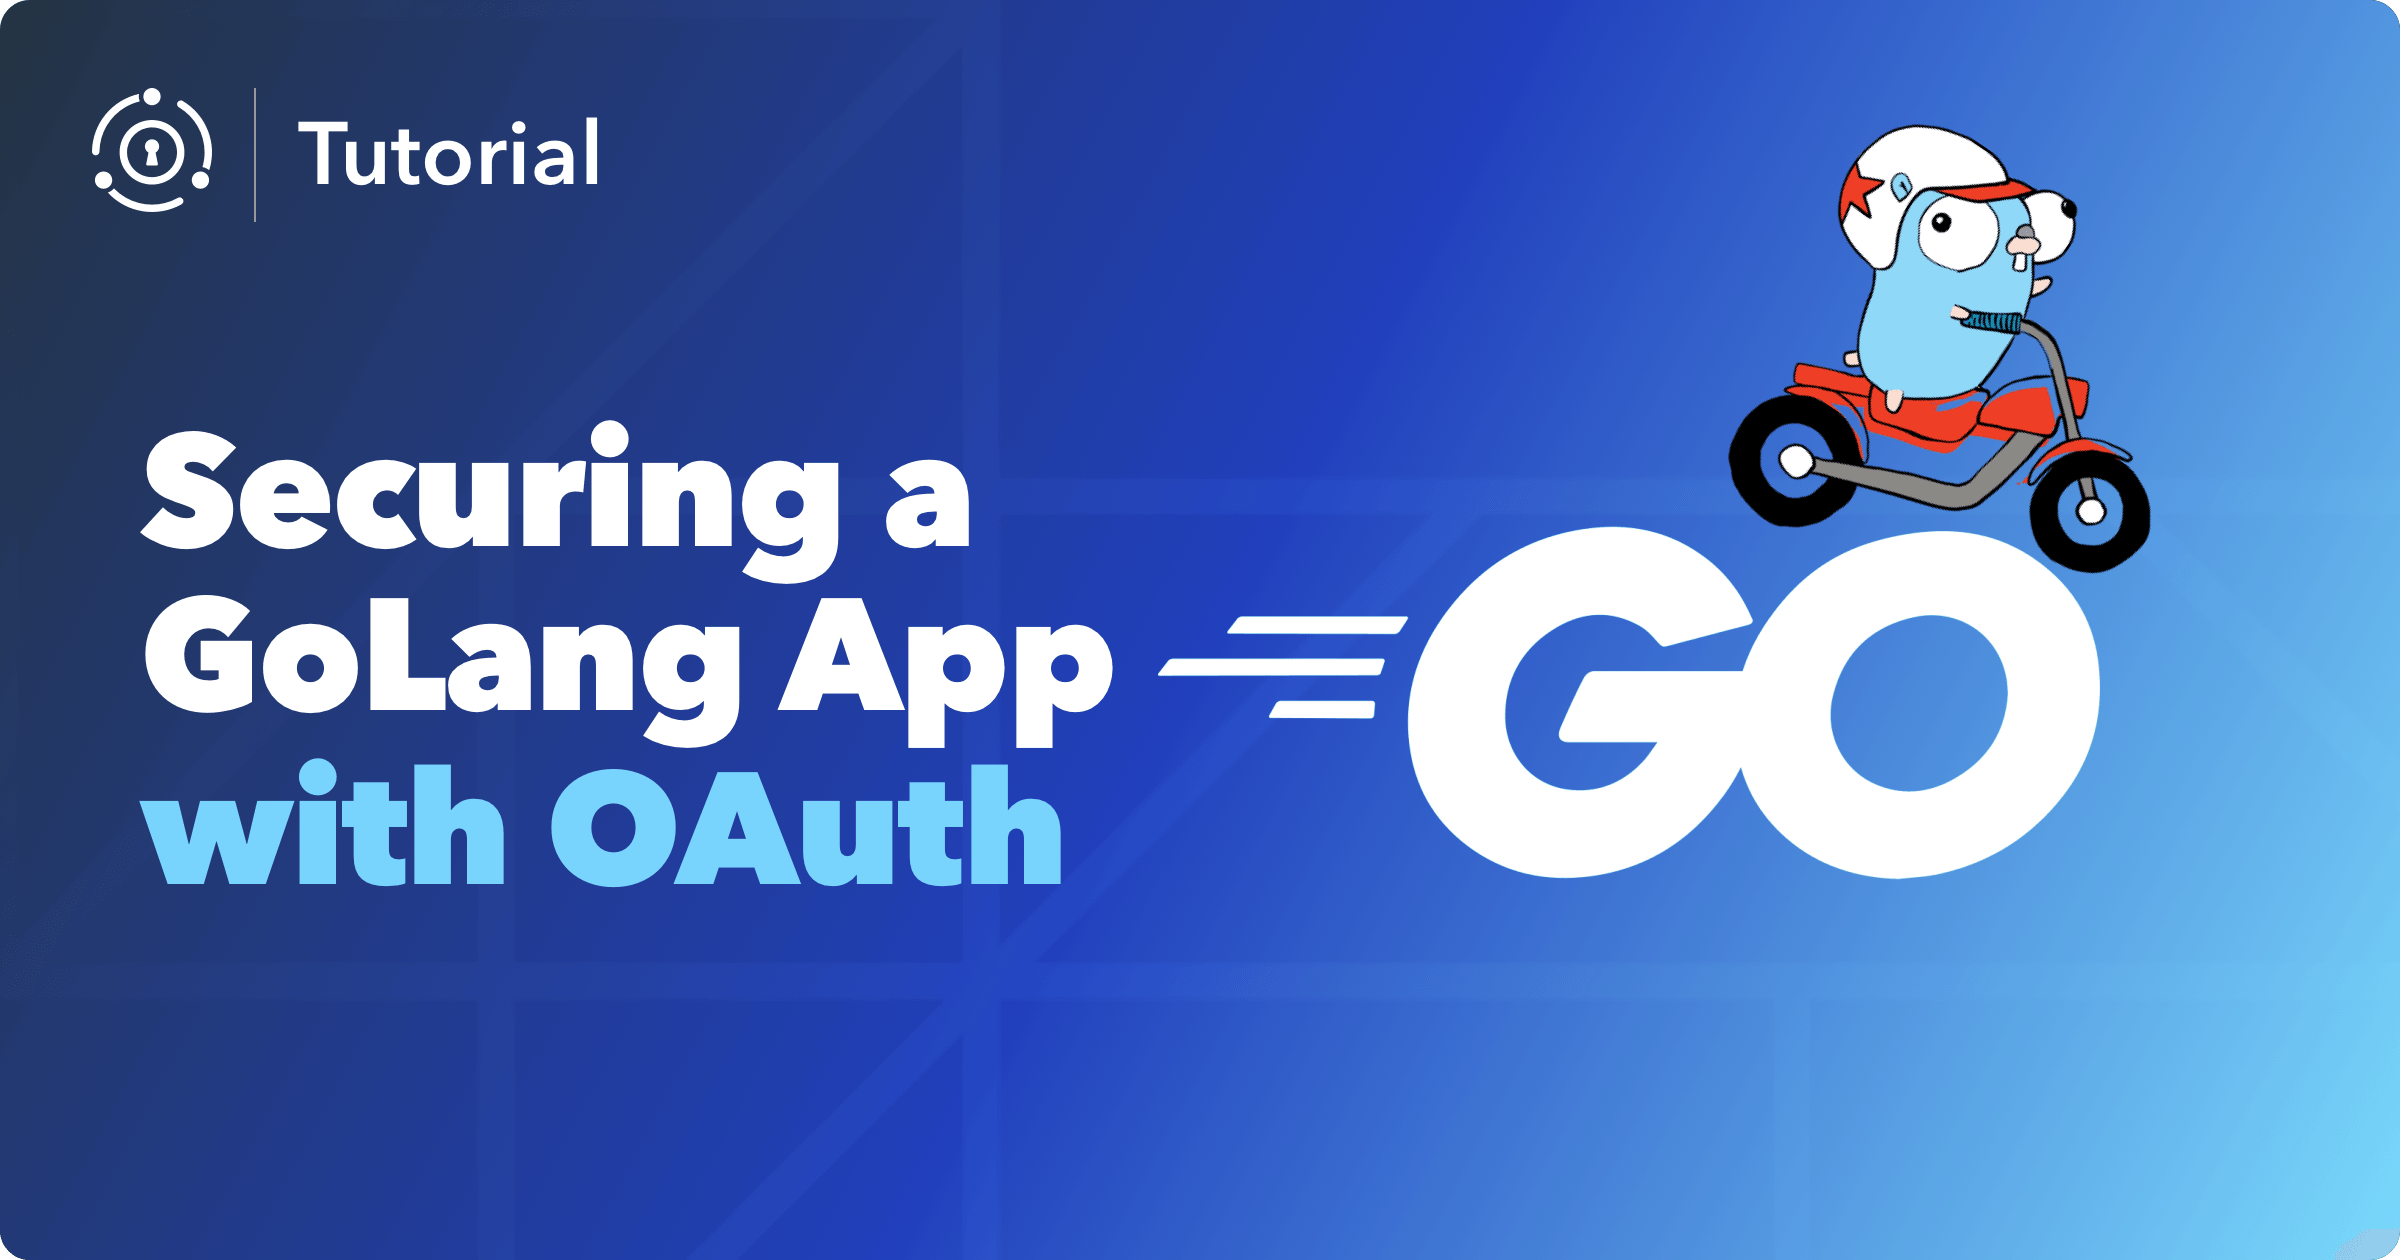 Securing A Golang App with OAuth